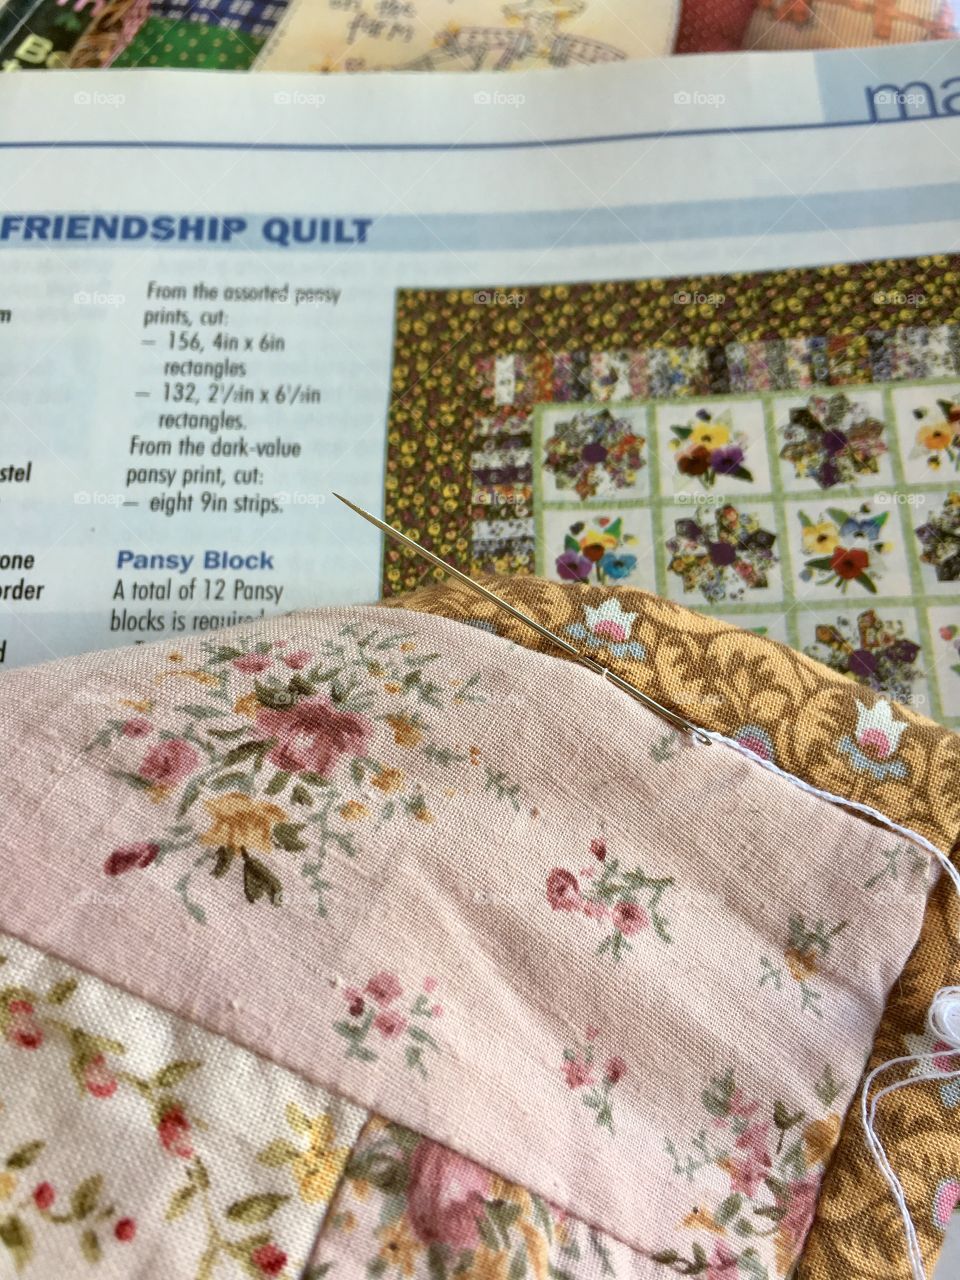 Hand sewing a friendship quilt
DIY FOAP Fall Mission